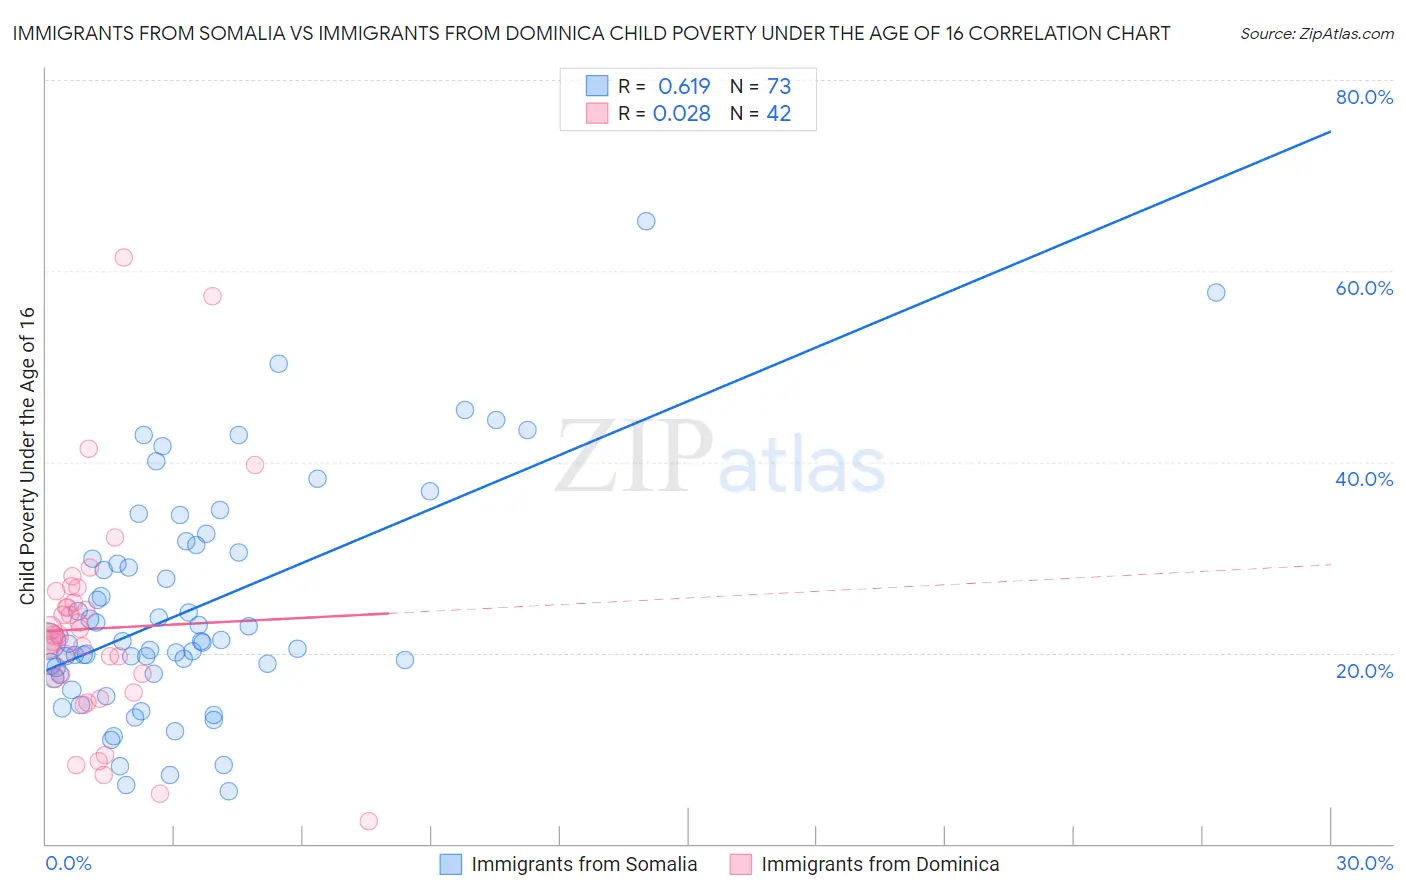 Immigrants from Somalia vs Immigrants from Dominica Child Poverty Under the Age of 16